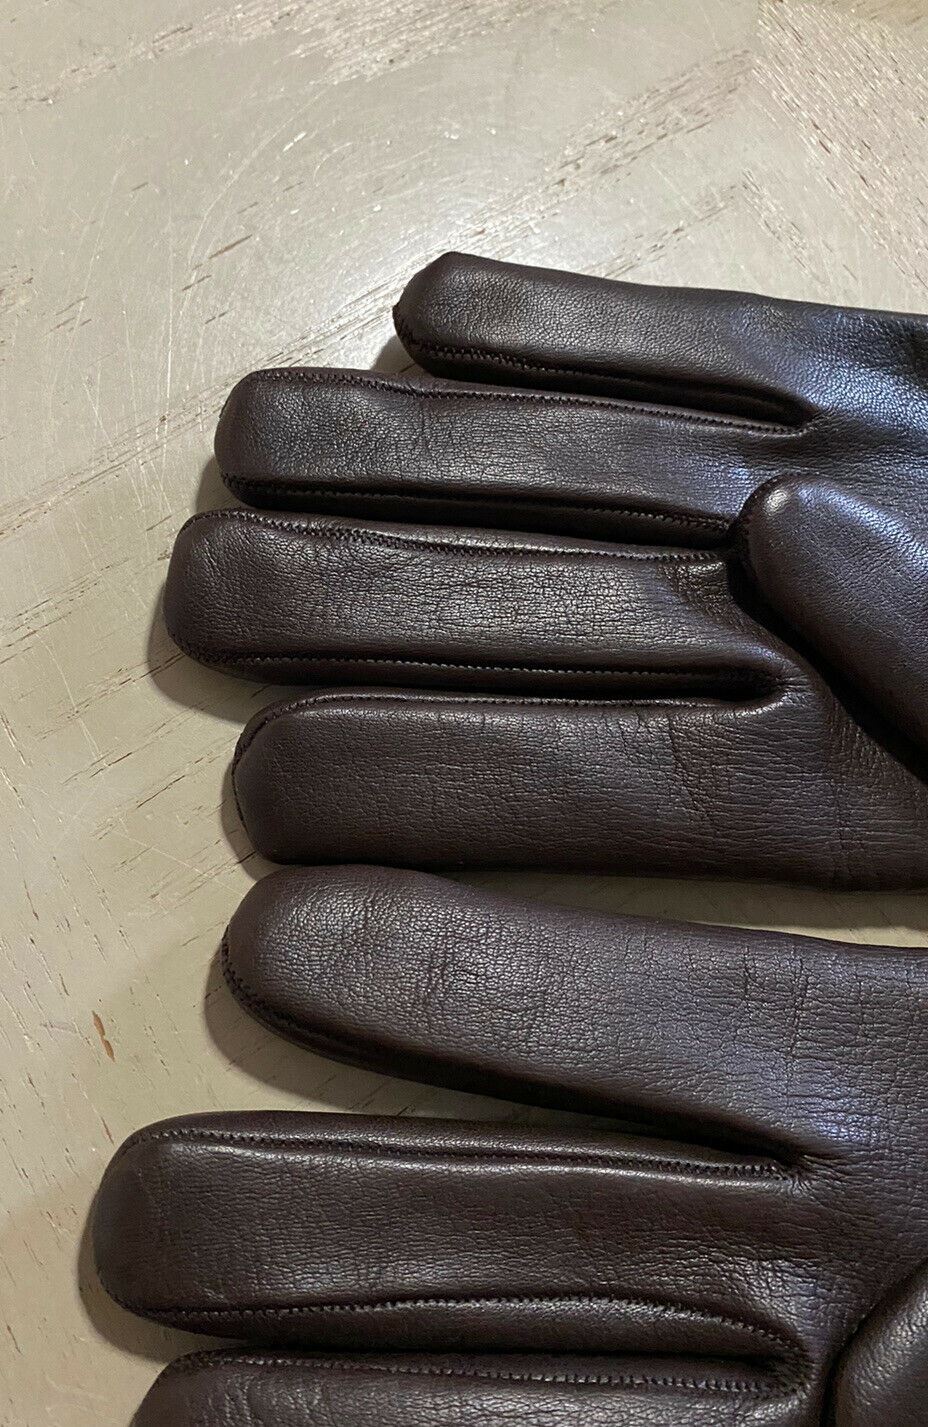 NWT $1280 Gucci Women Soft Leather/Cashmere Gloves DK Brown Size M Italy